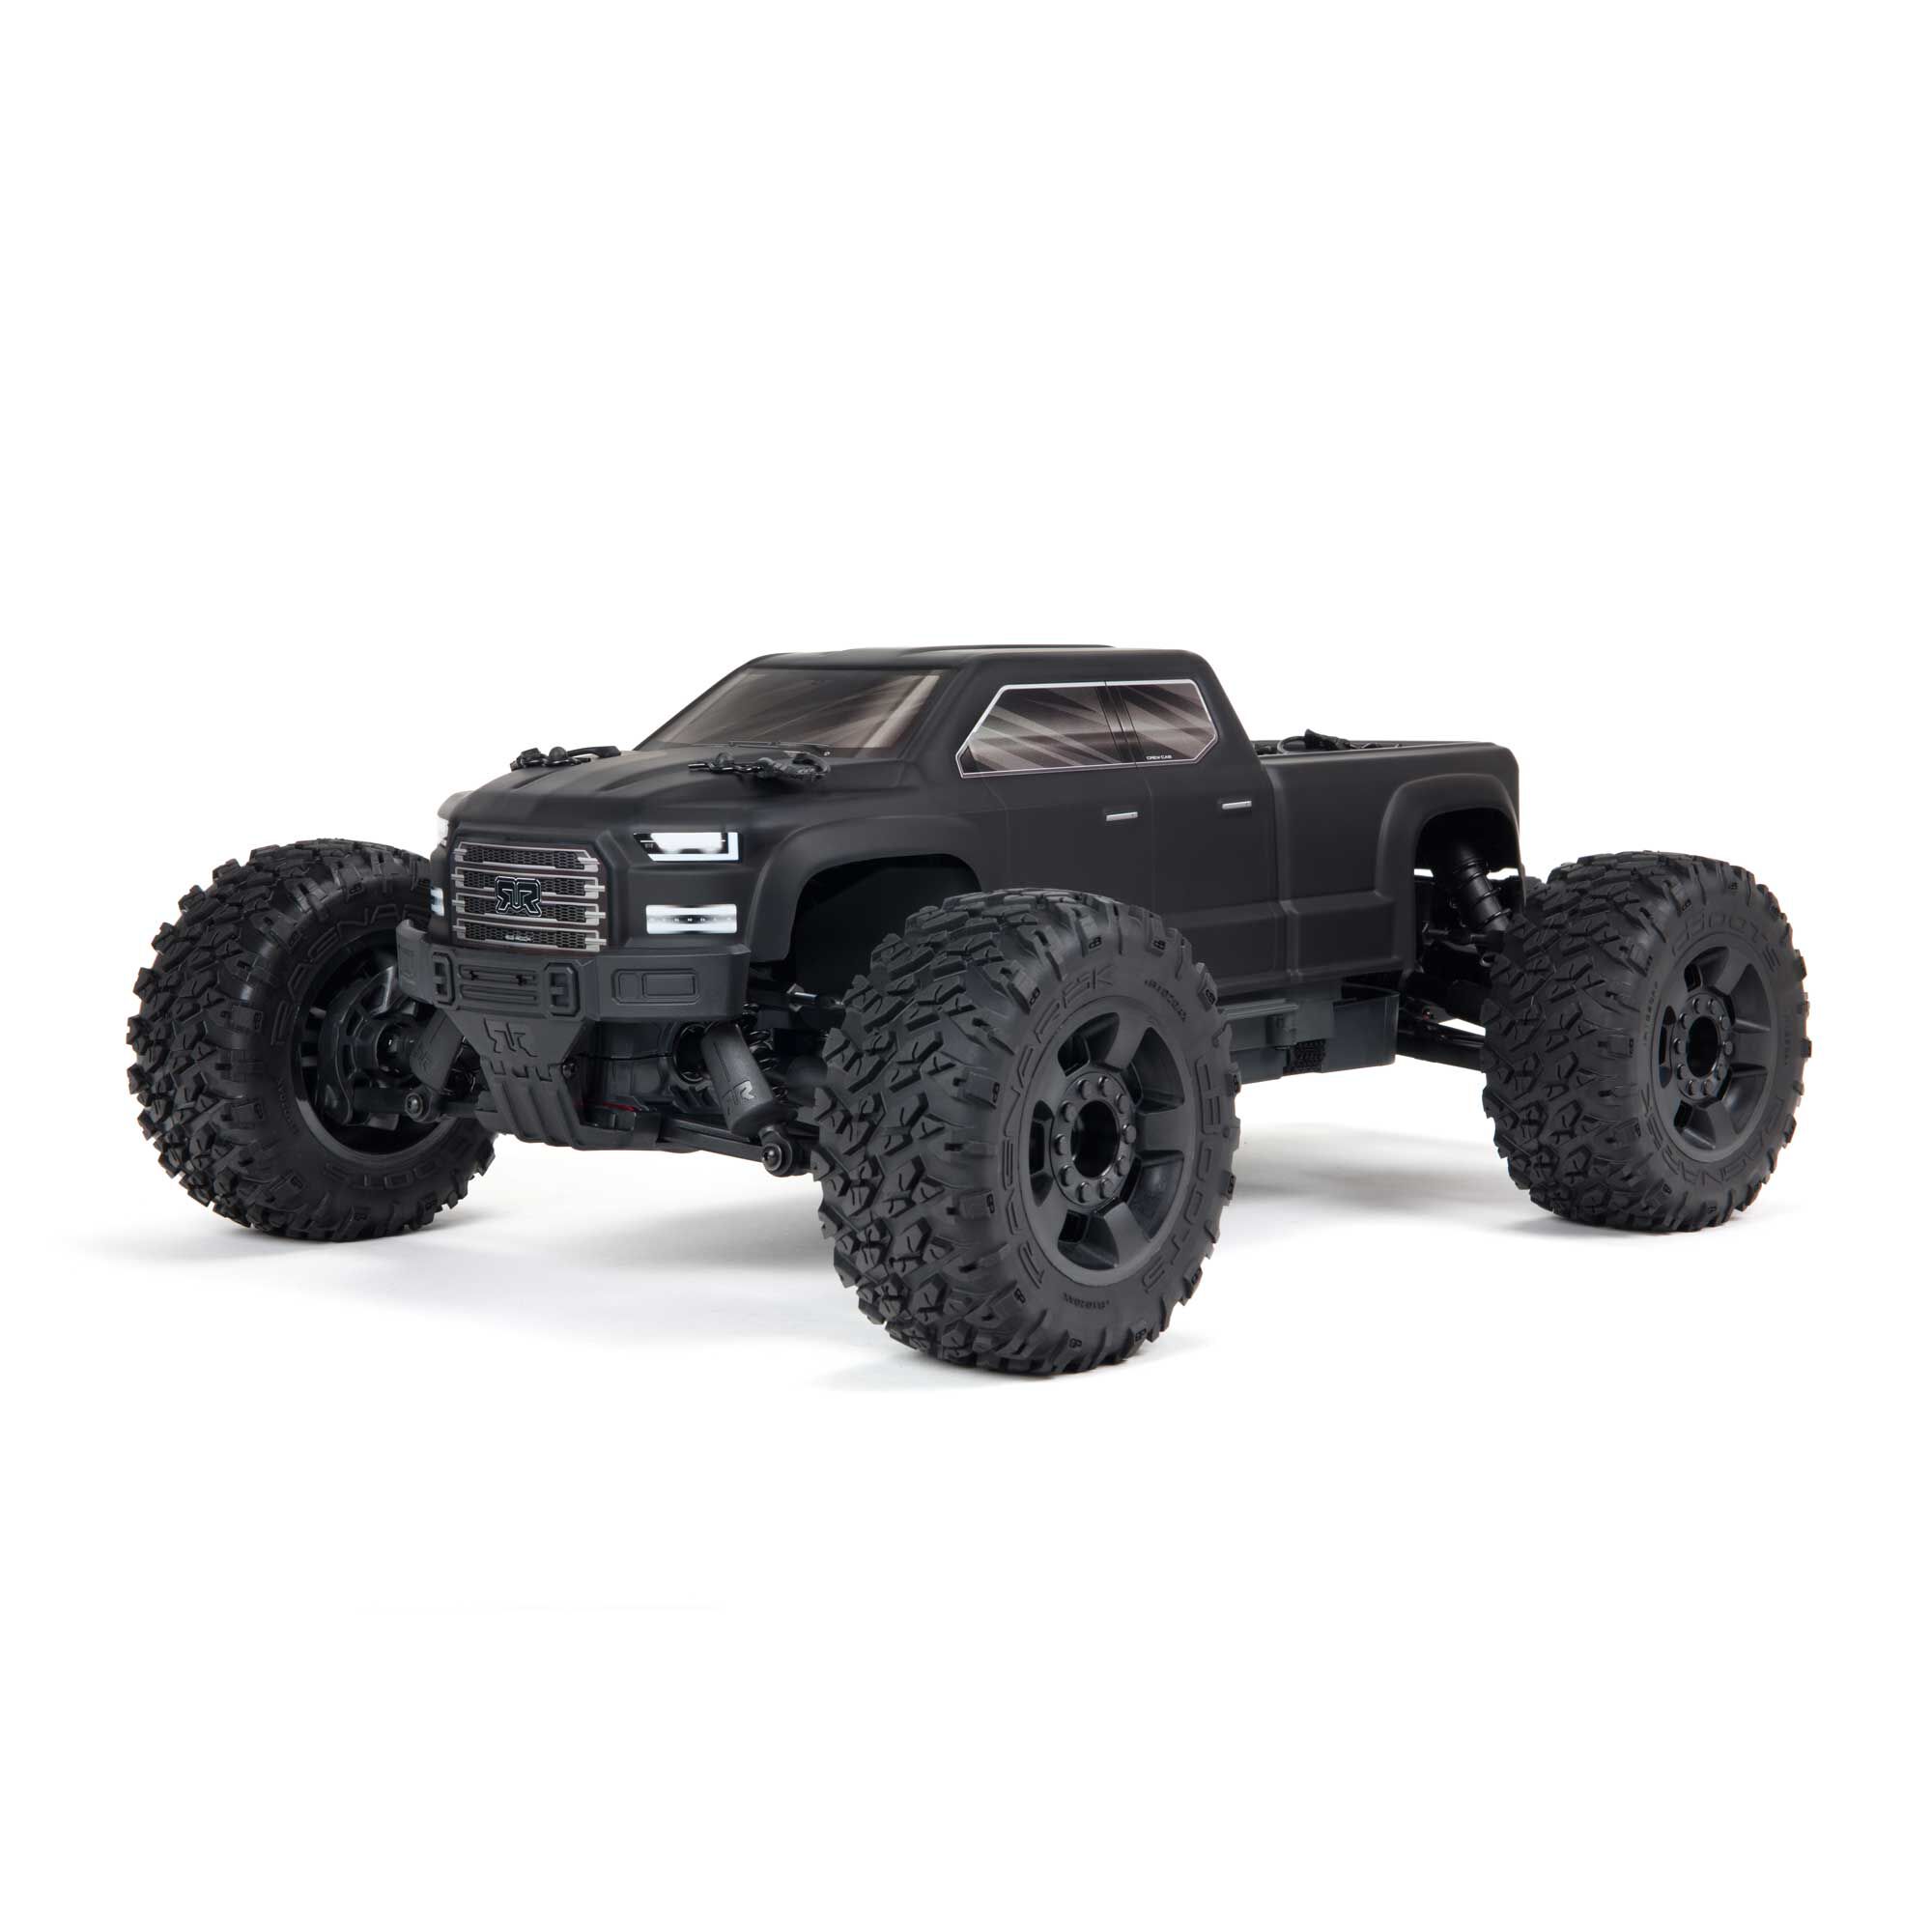 worlds biggest rc car for sale